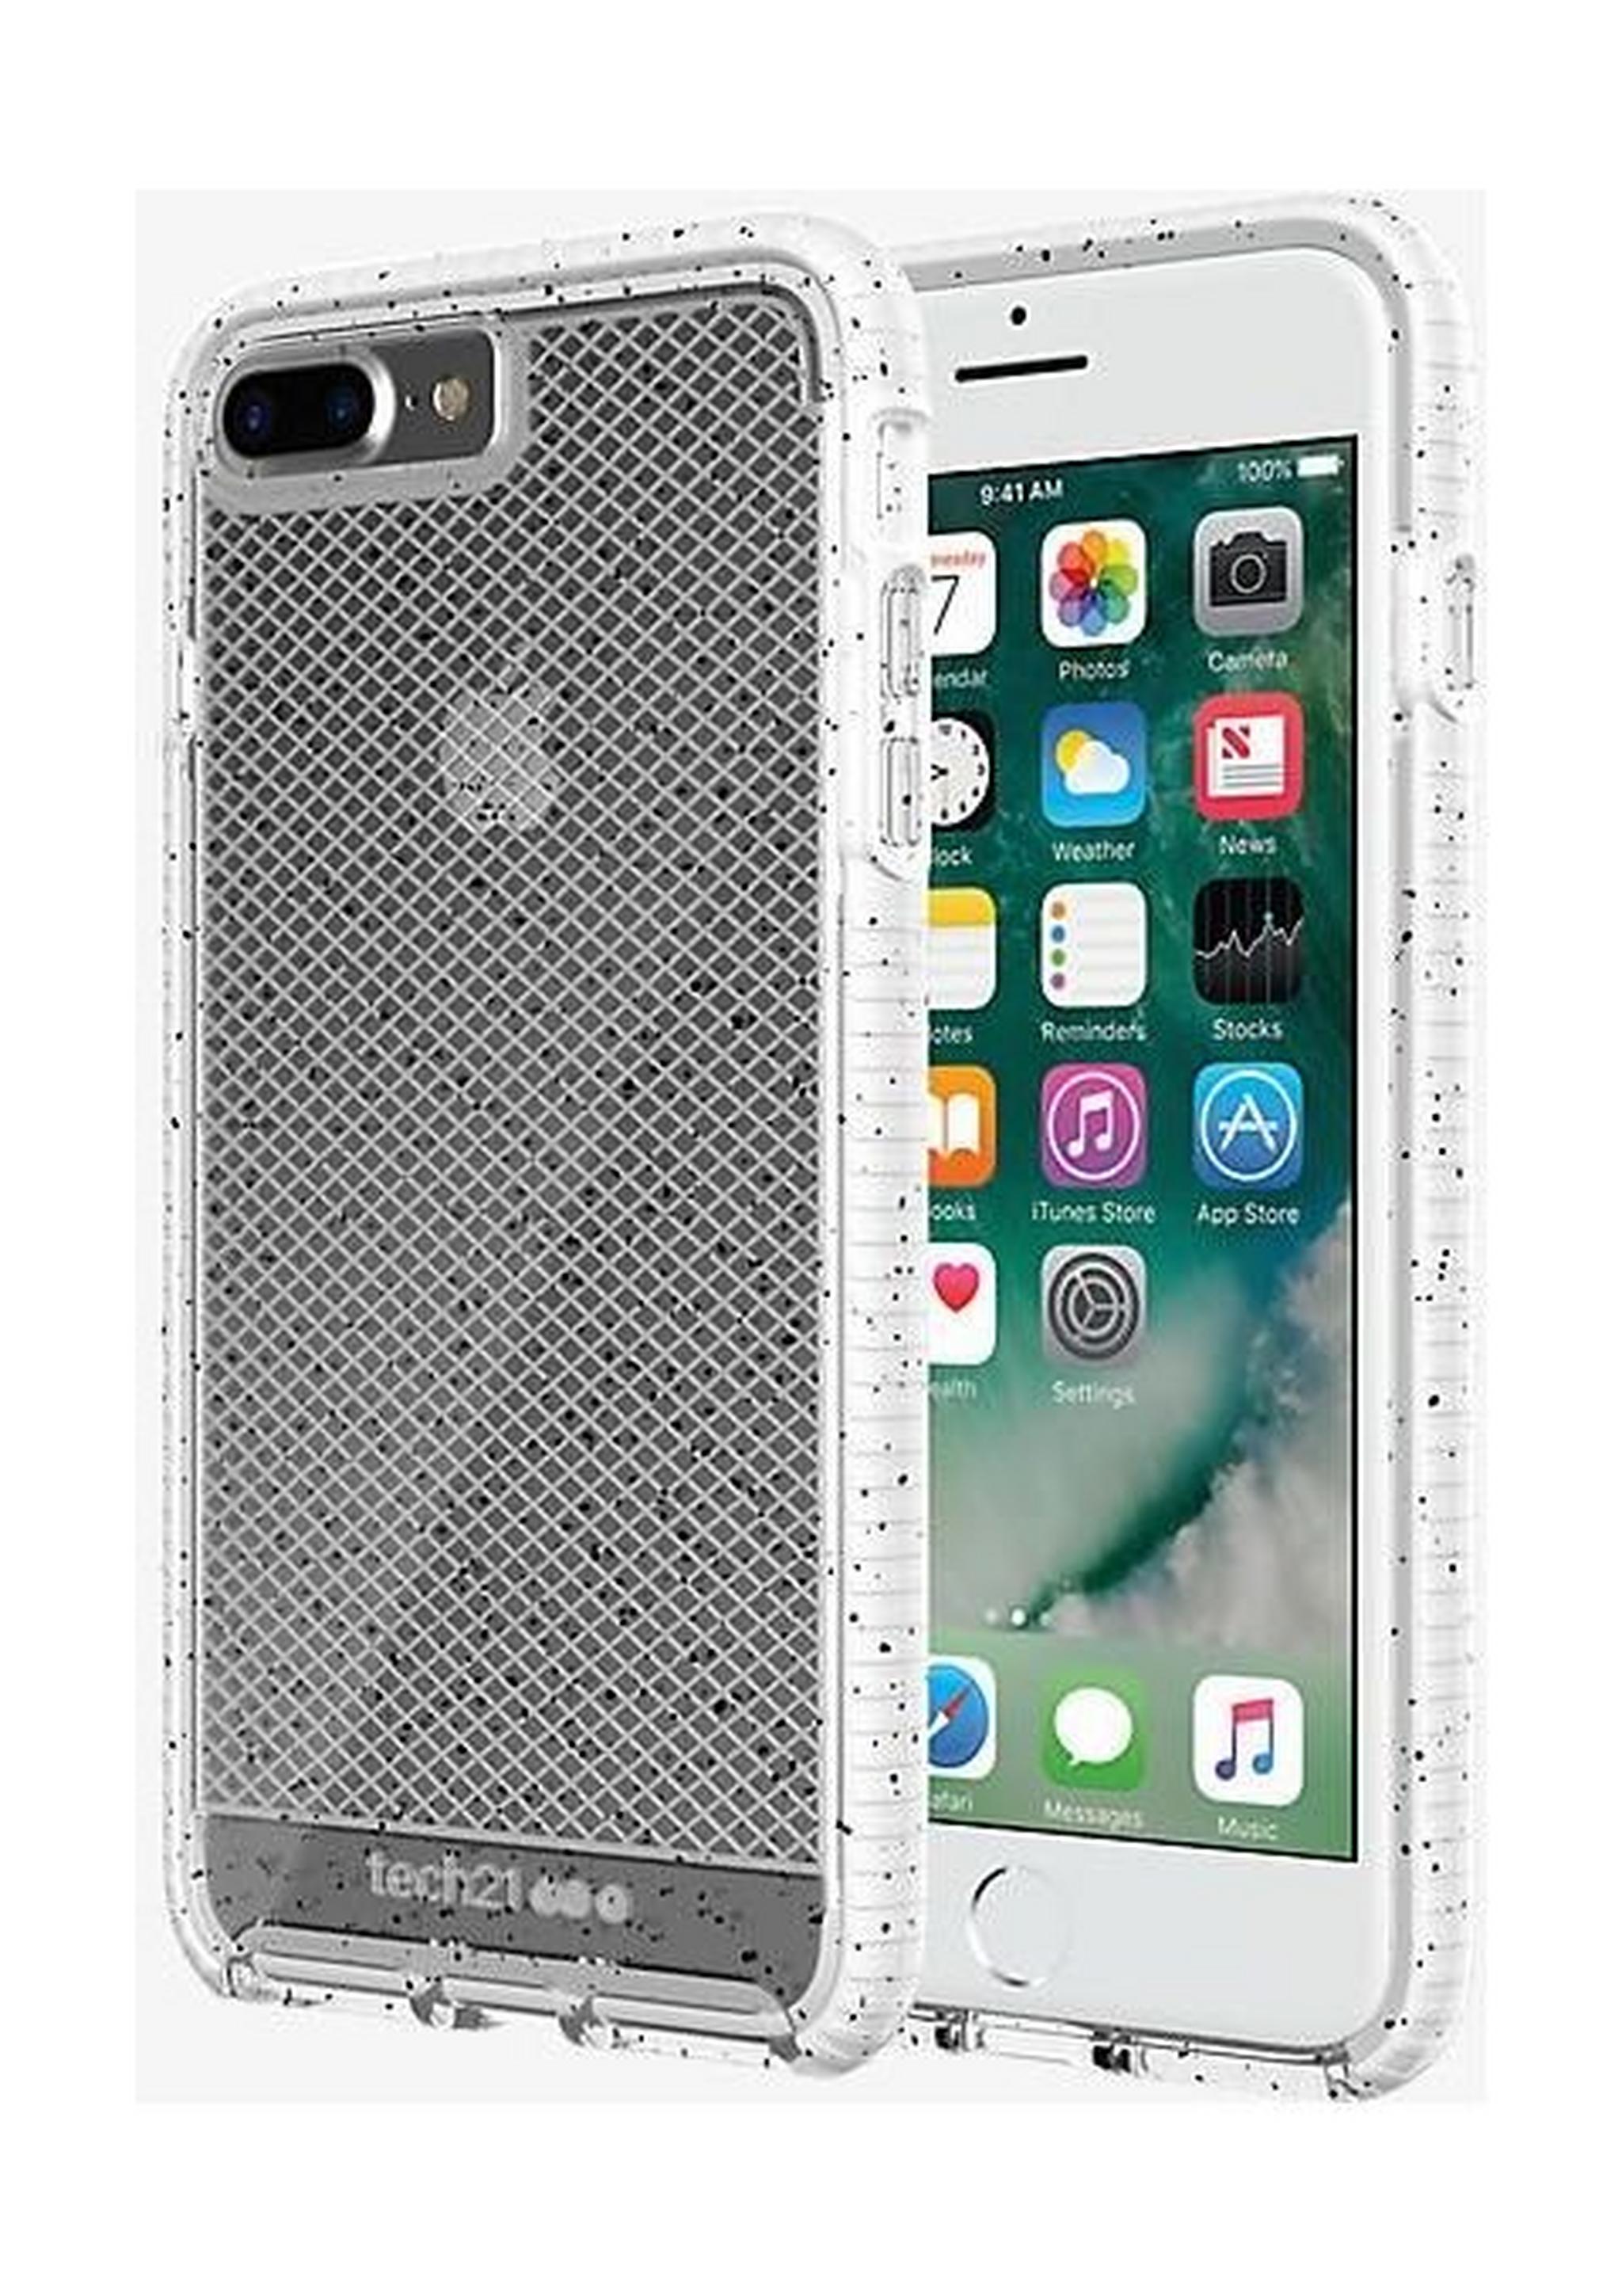 Tech21 Evo Check Active Edition Case for iPhone 7 Plus (T21-5543) - White